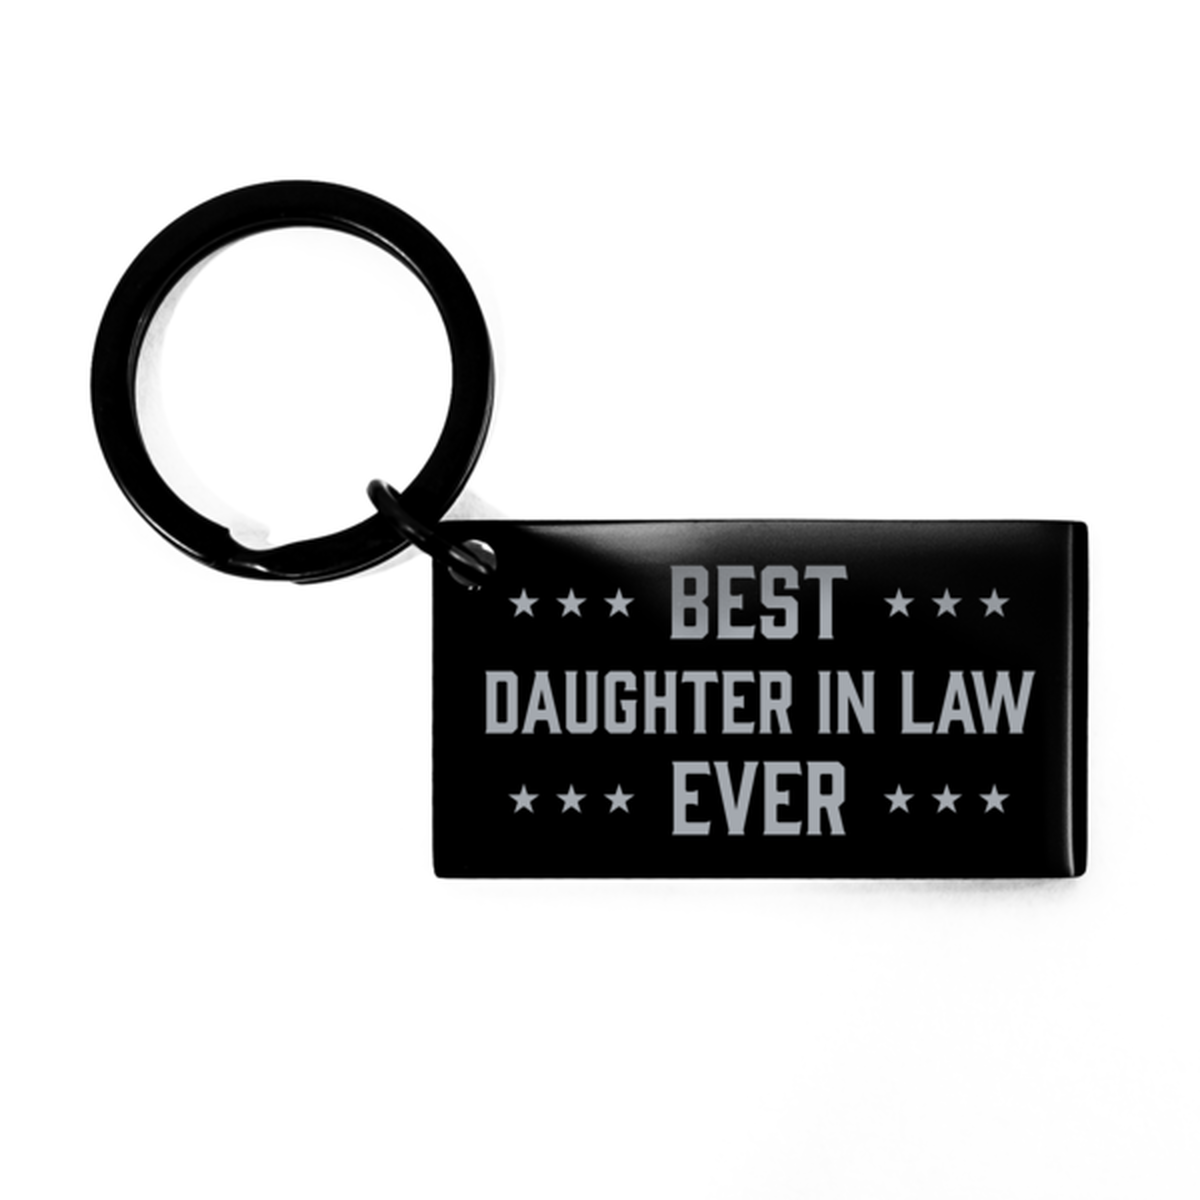 Best Daughter in law Ever Daughter in law Gifts, Funny Black Keychain For Daughter in law, Birthday Engraved Keyring Presents For Women